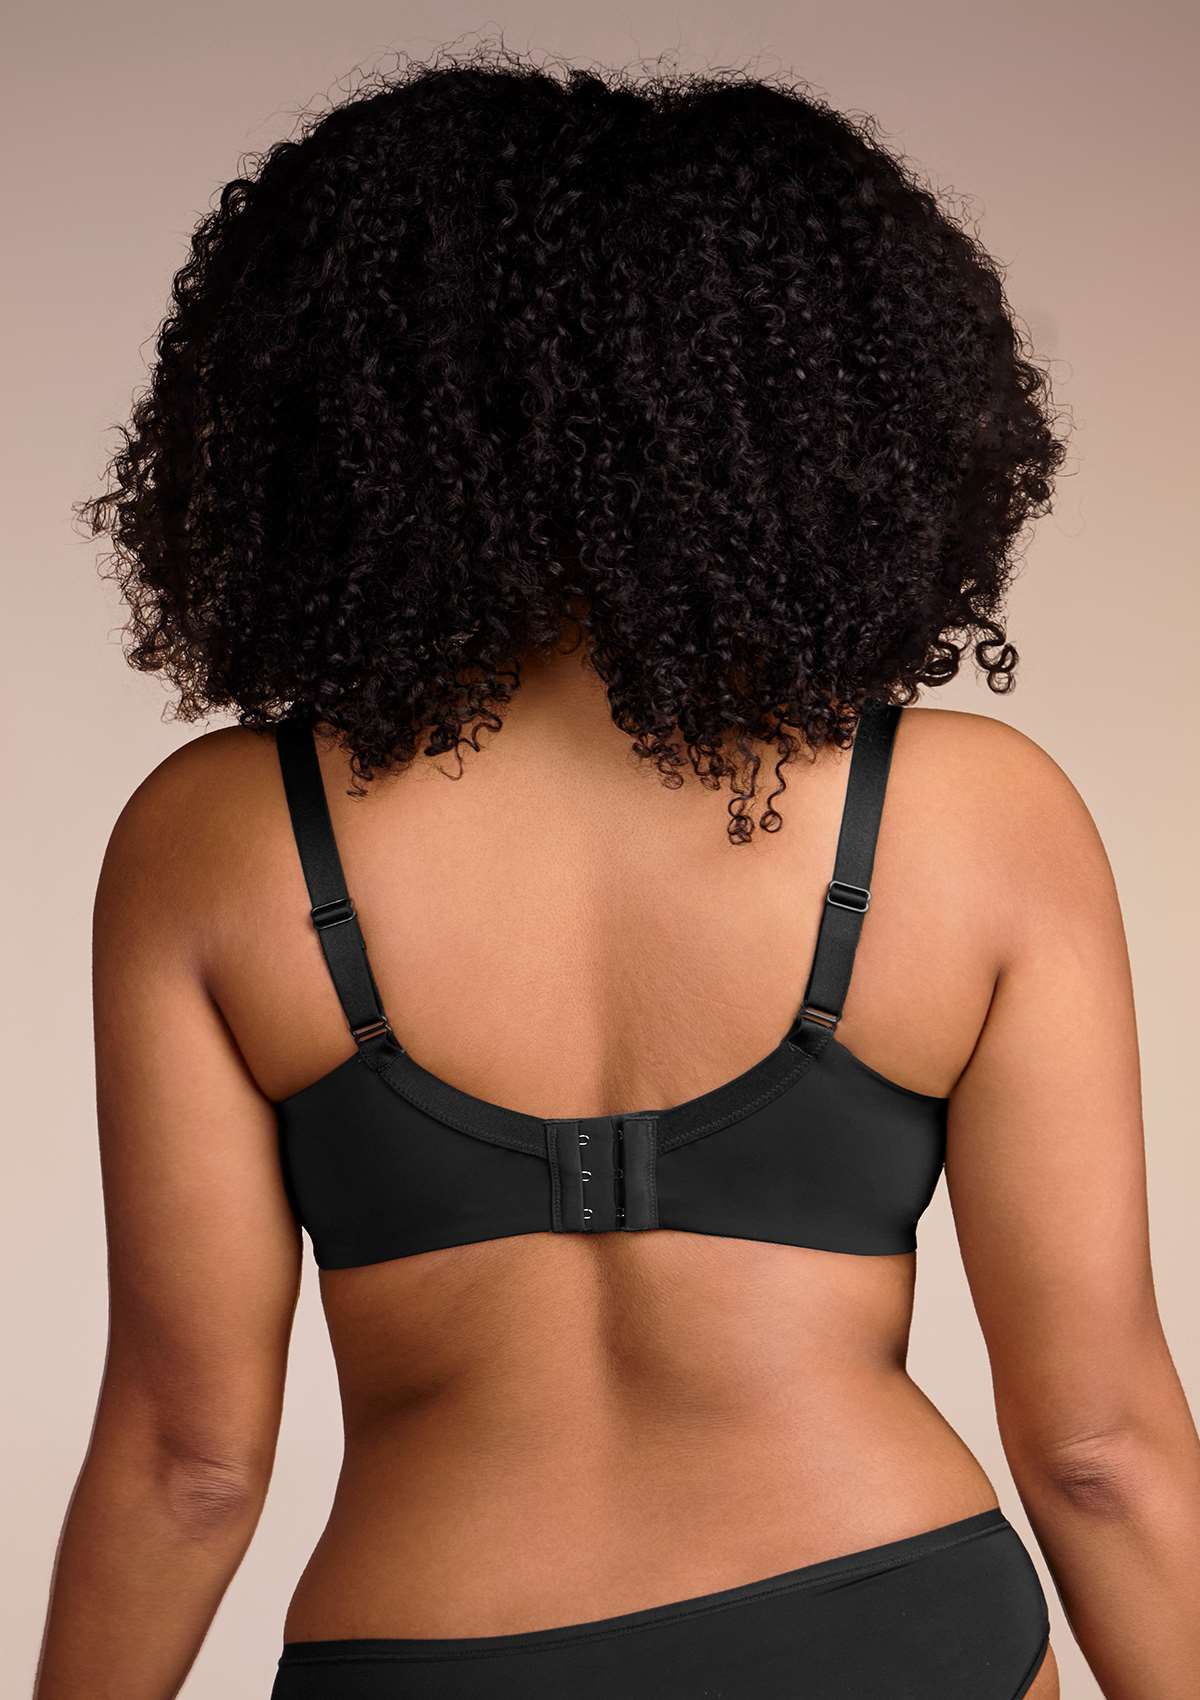 HSIA Gemma Smooth Padded T-shirt Everyday Bras - For Lift And Comfort - Black / 36 / C